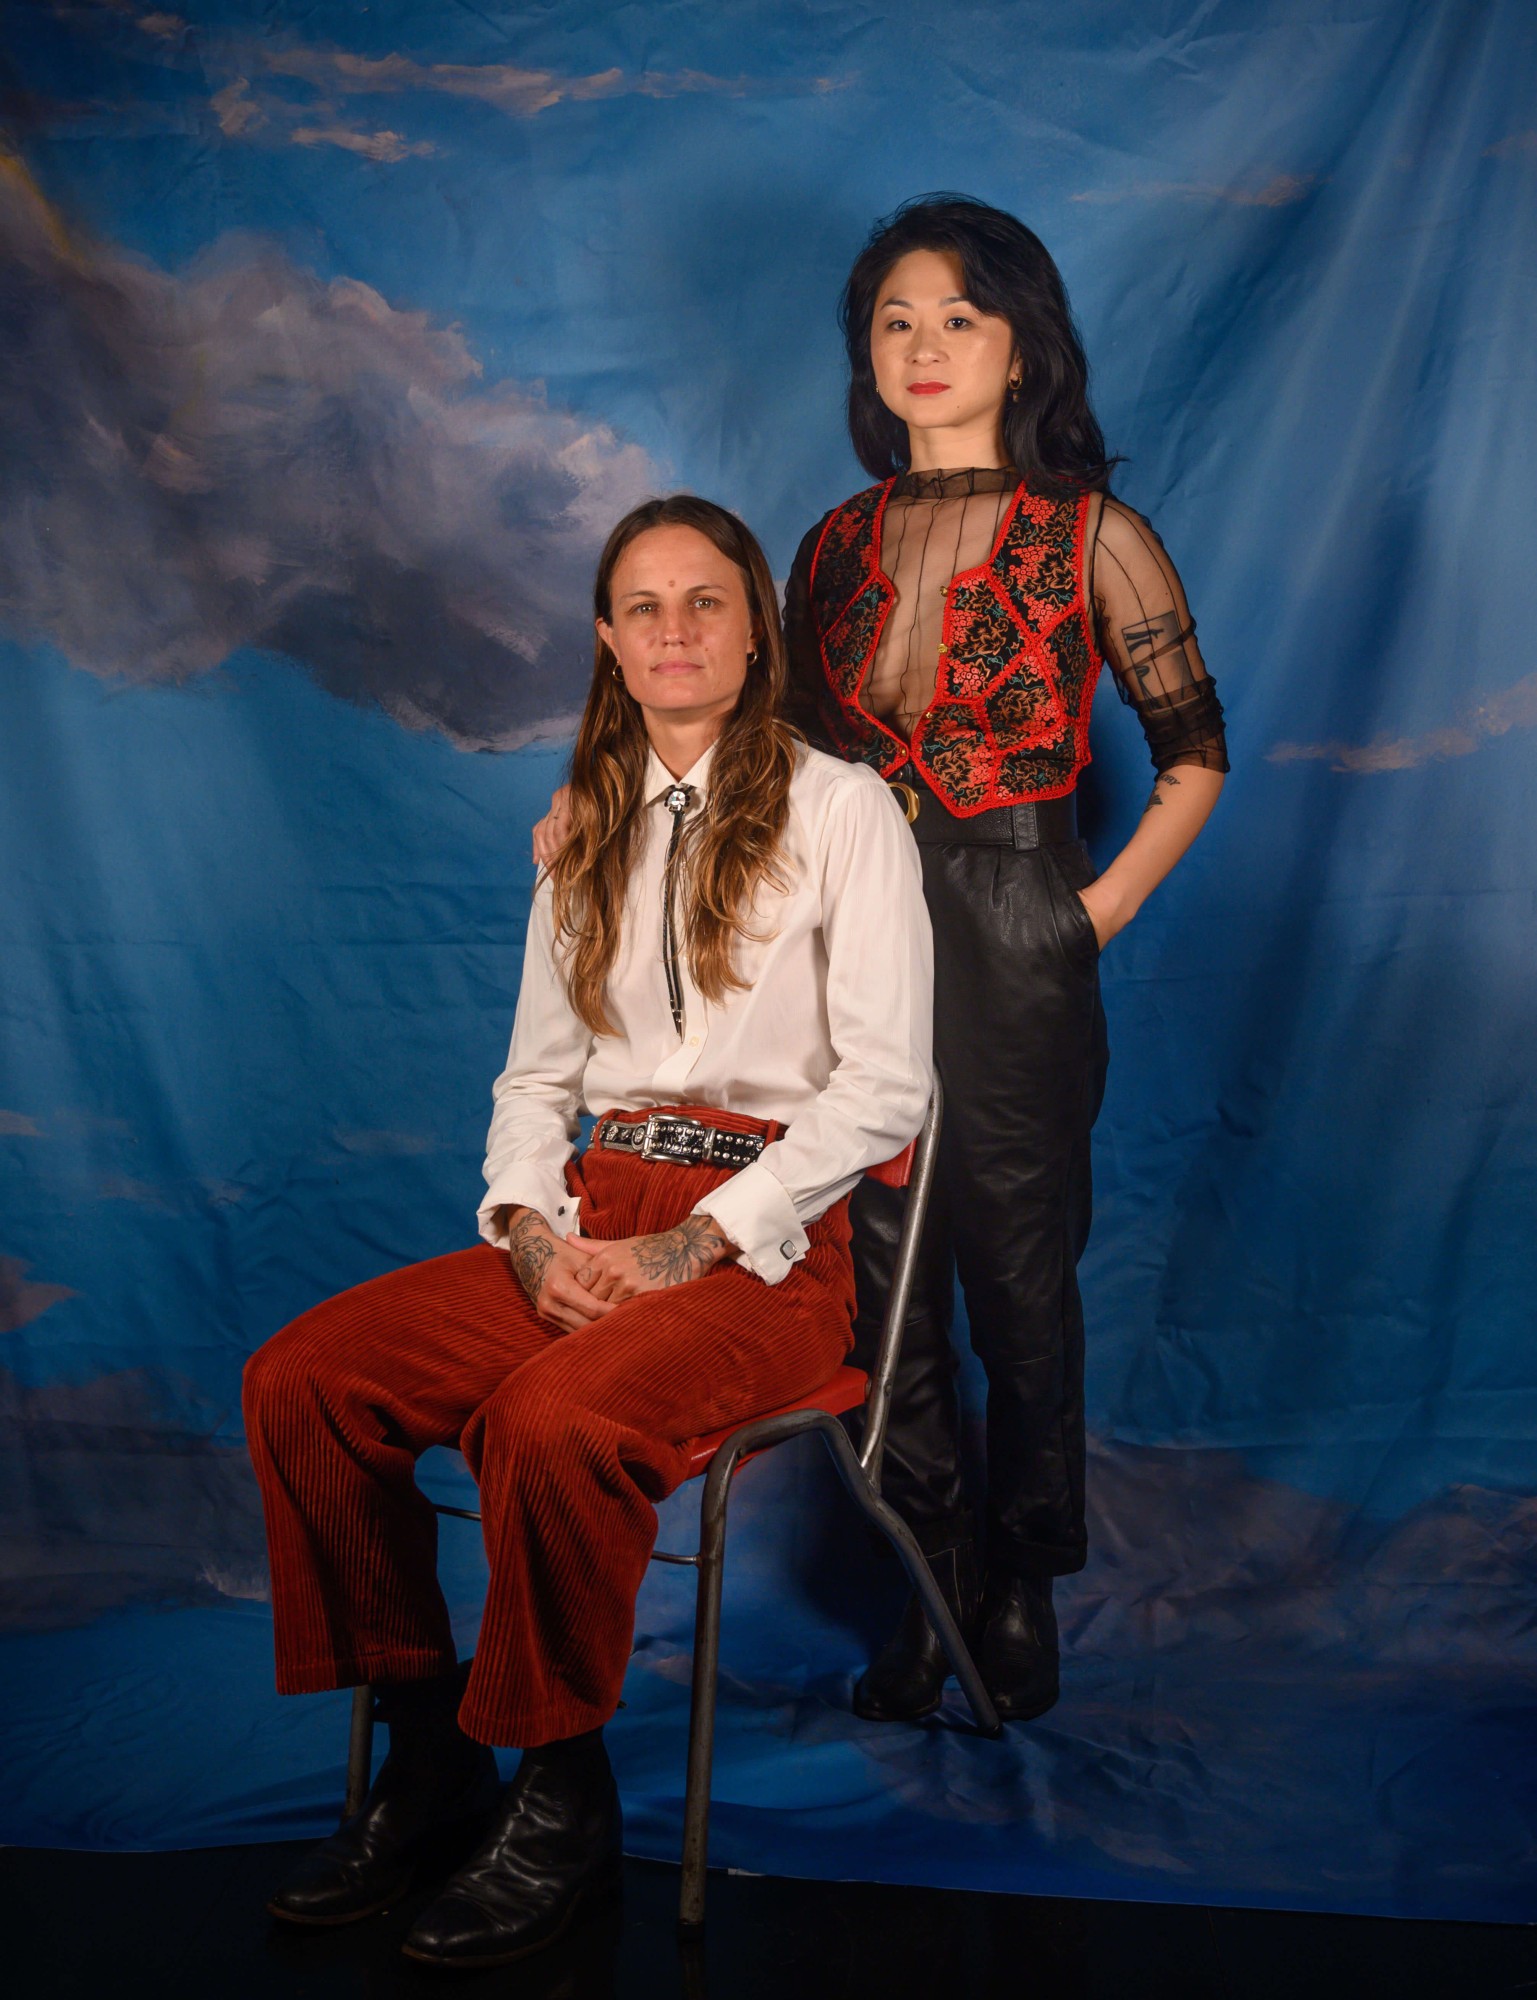 Joy, an Asian person dressed in a embroidered red vest, places her hand on her girlfriend Lyndsay’s shoulder.